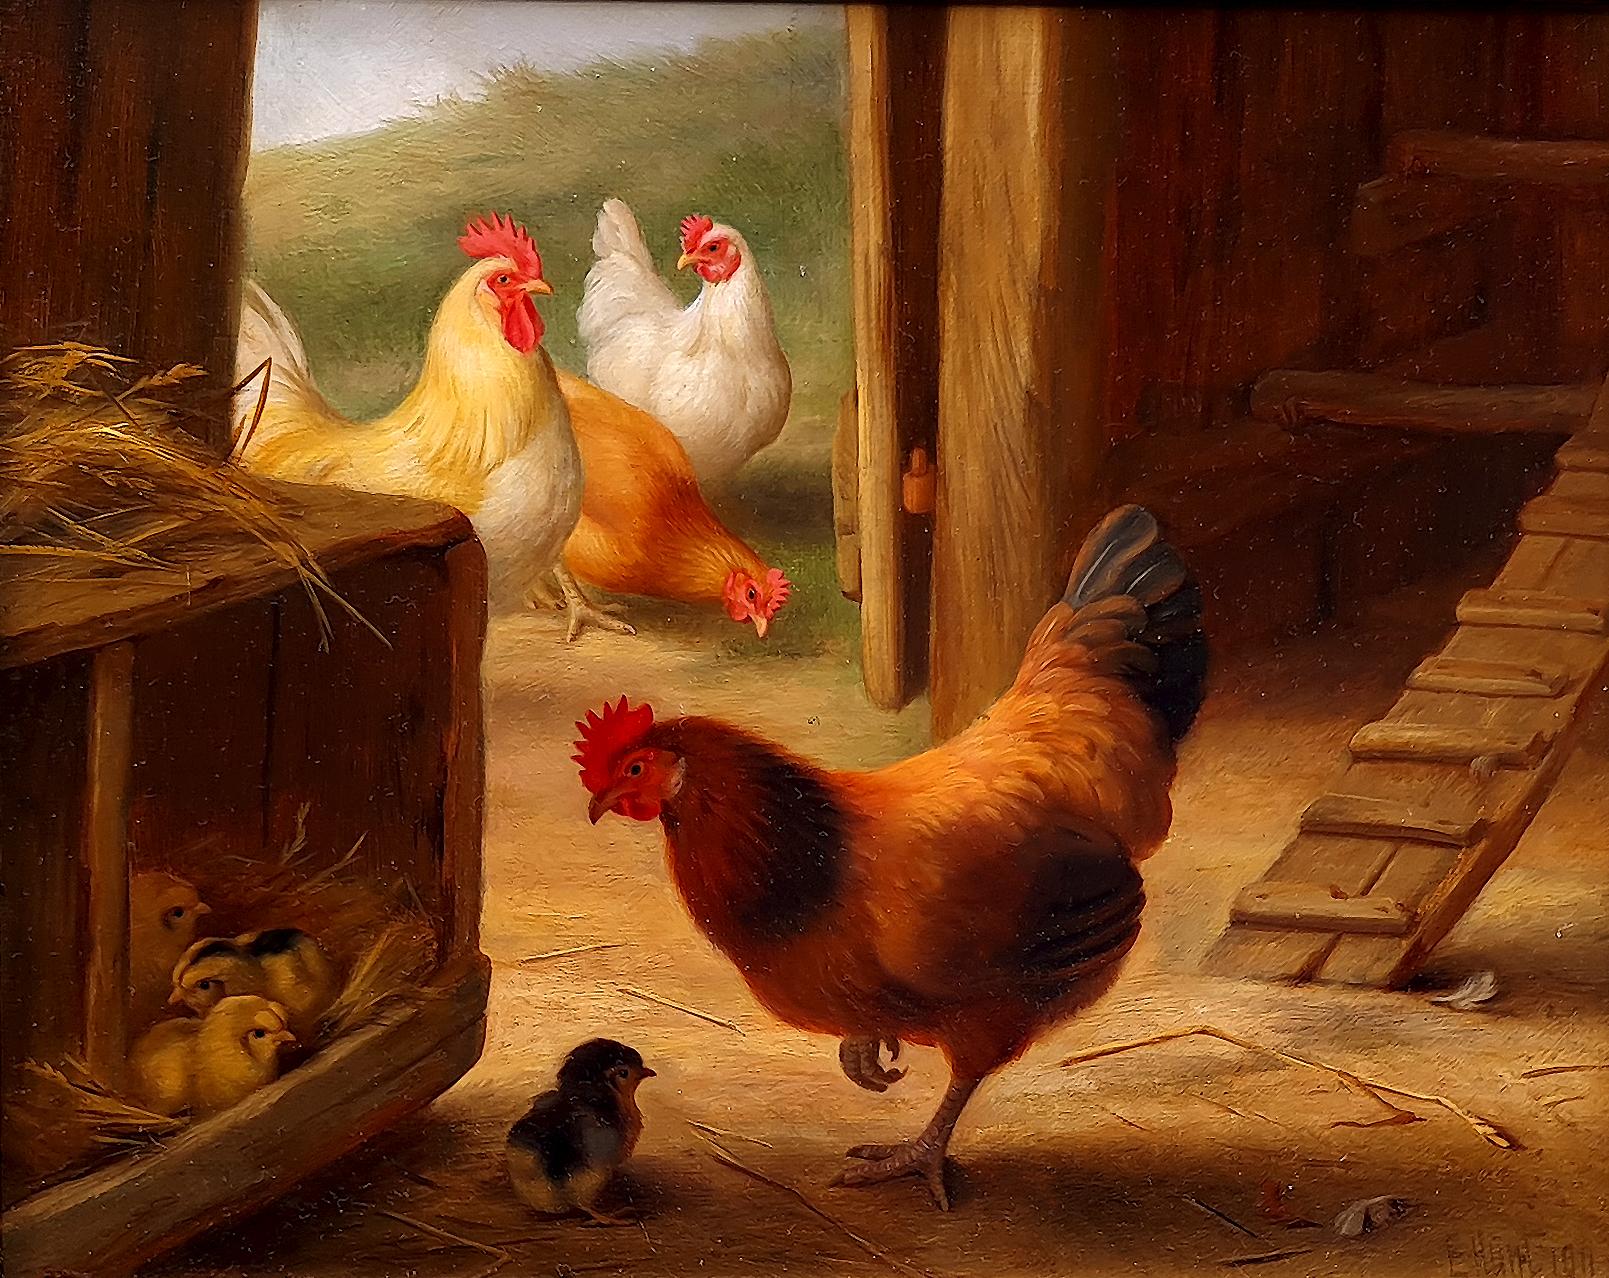 Under Mother's Watchful Eye - Painting by Edgar Hunt